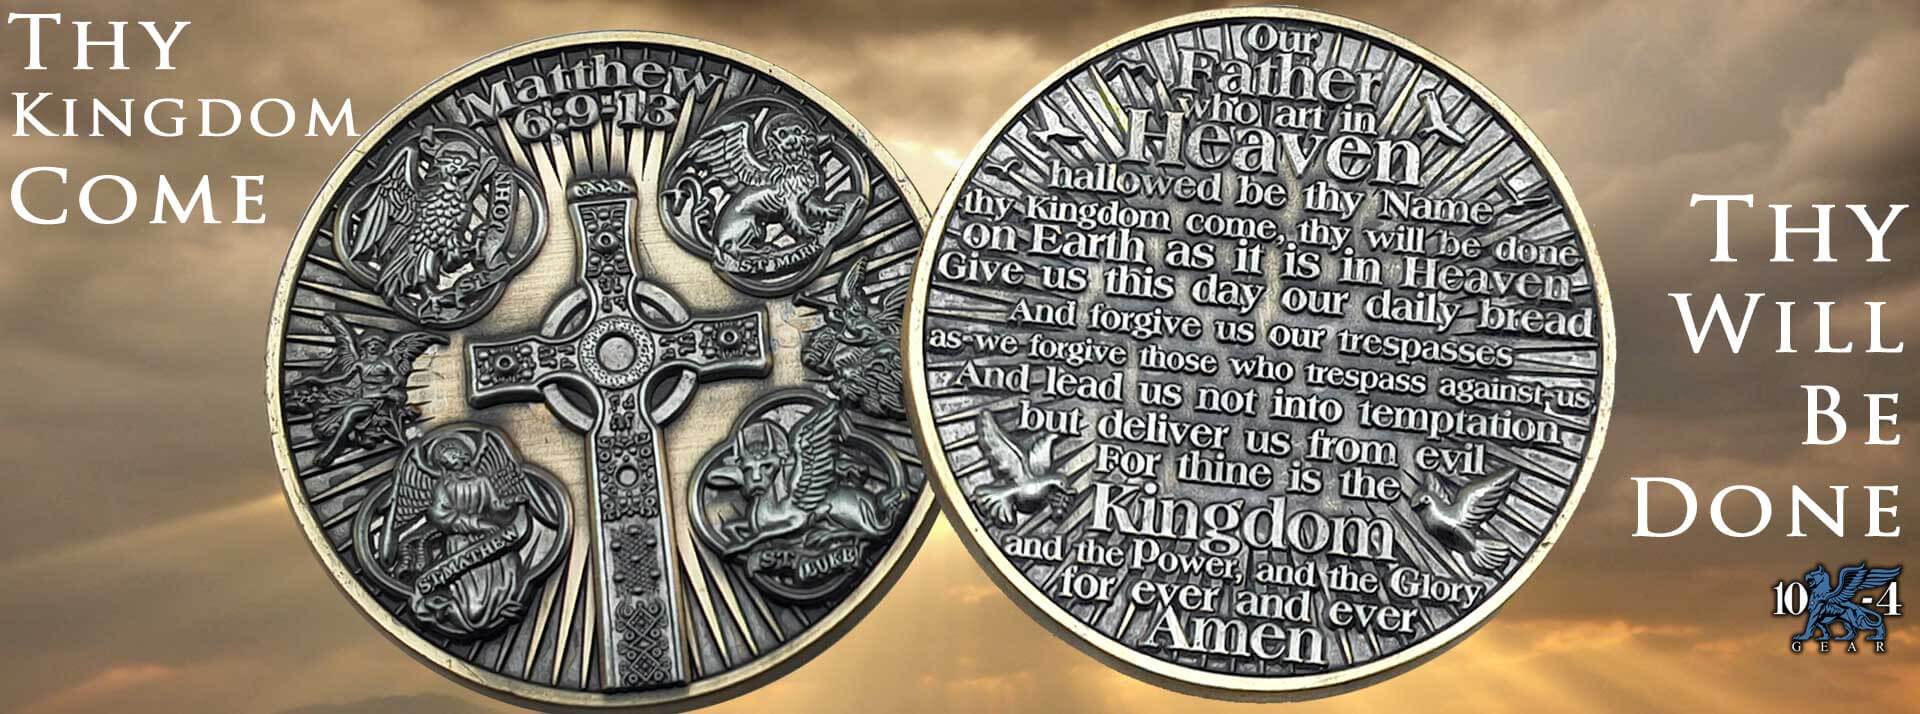 10-4 Gear The Lords Prayer Coin